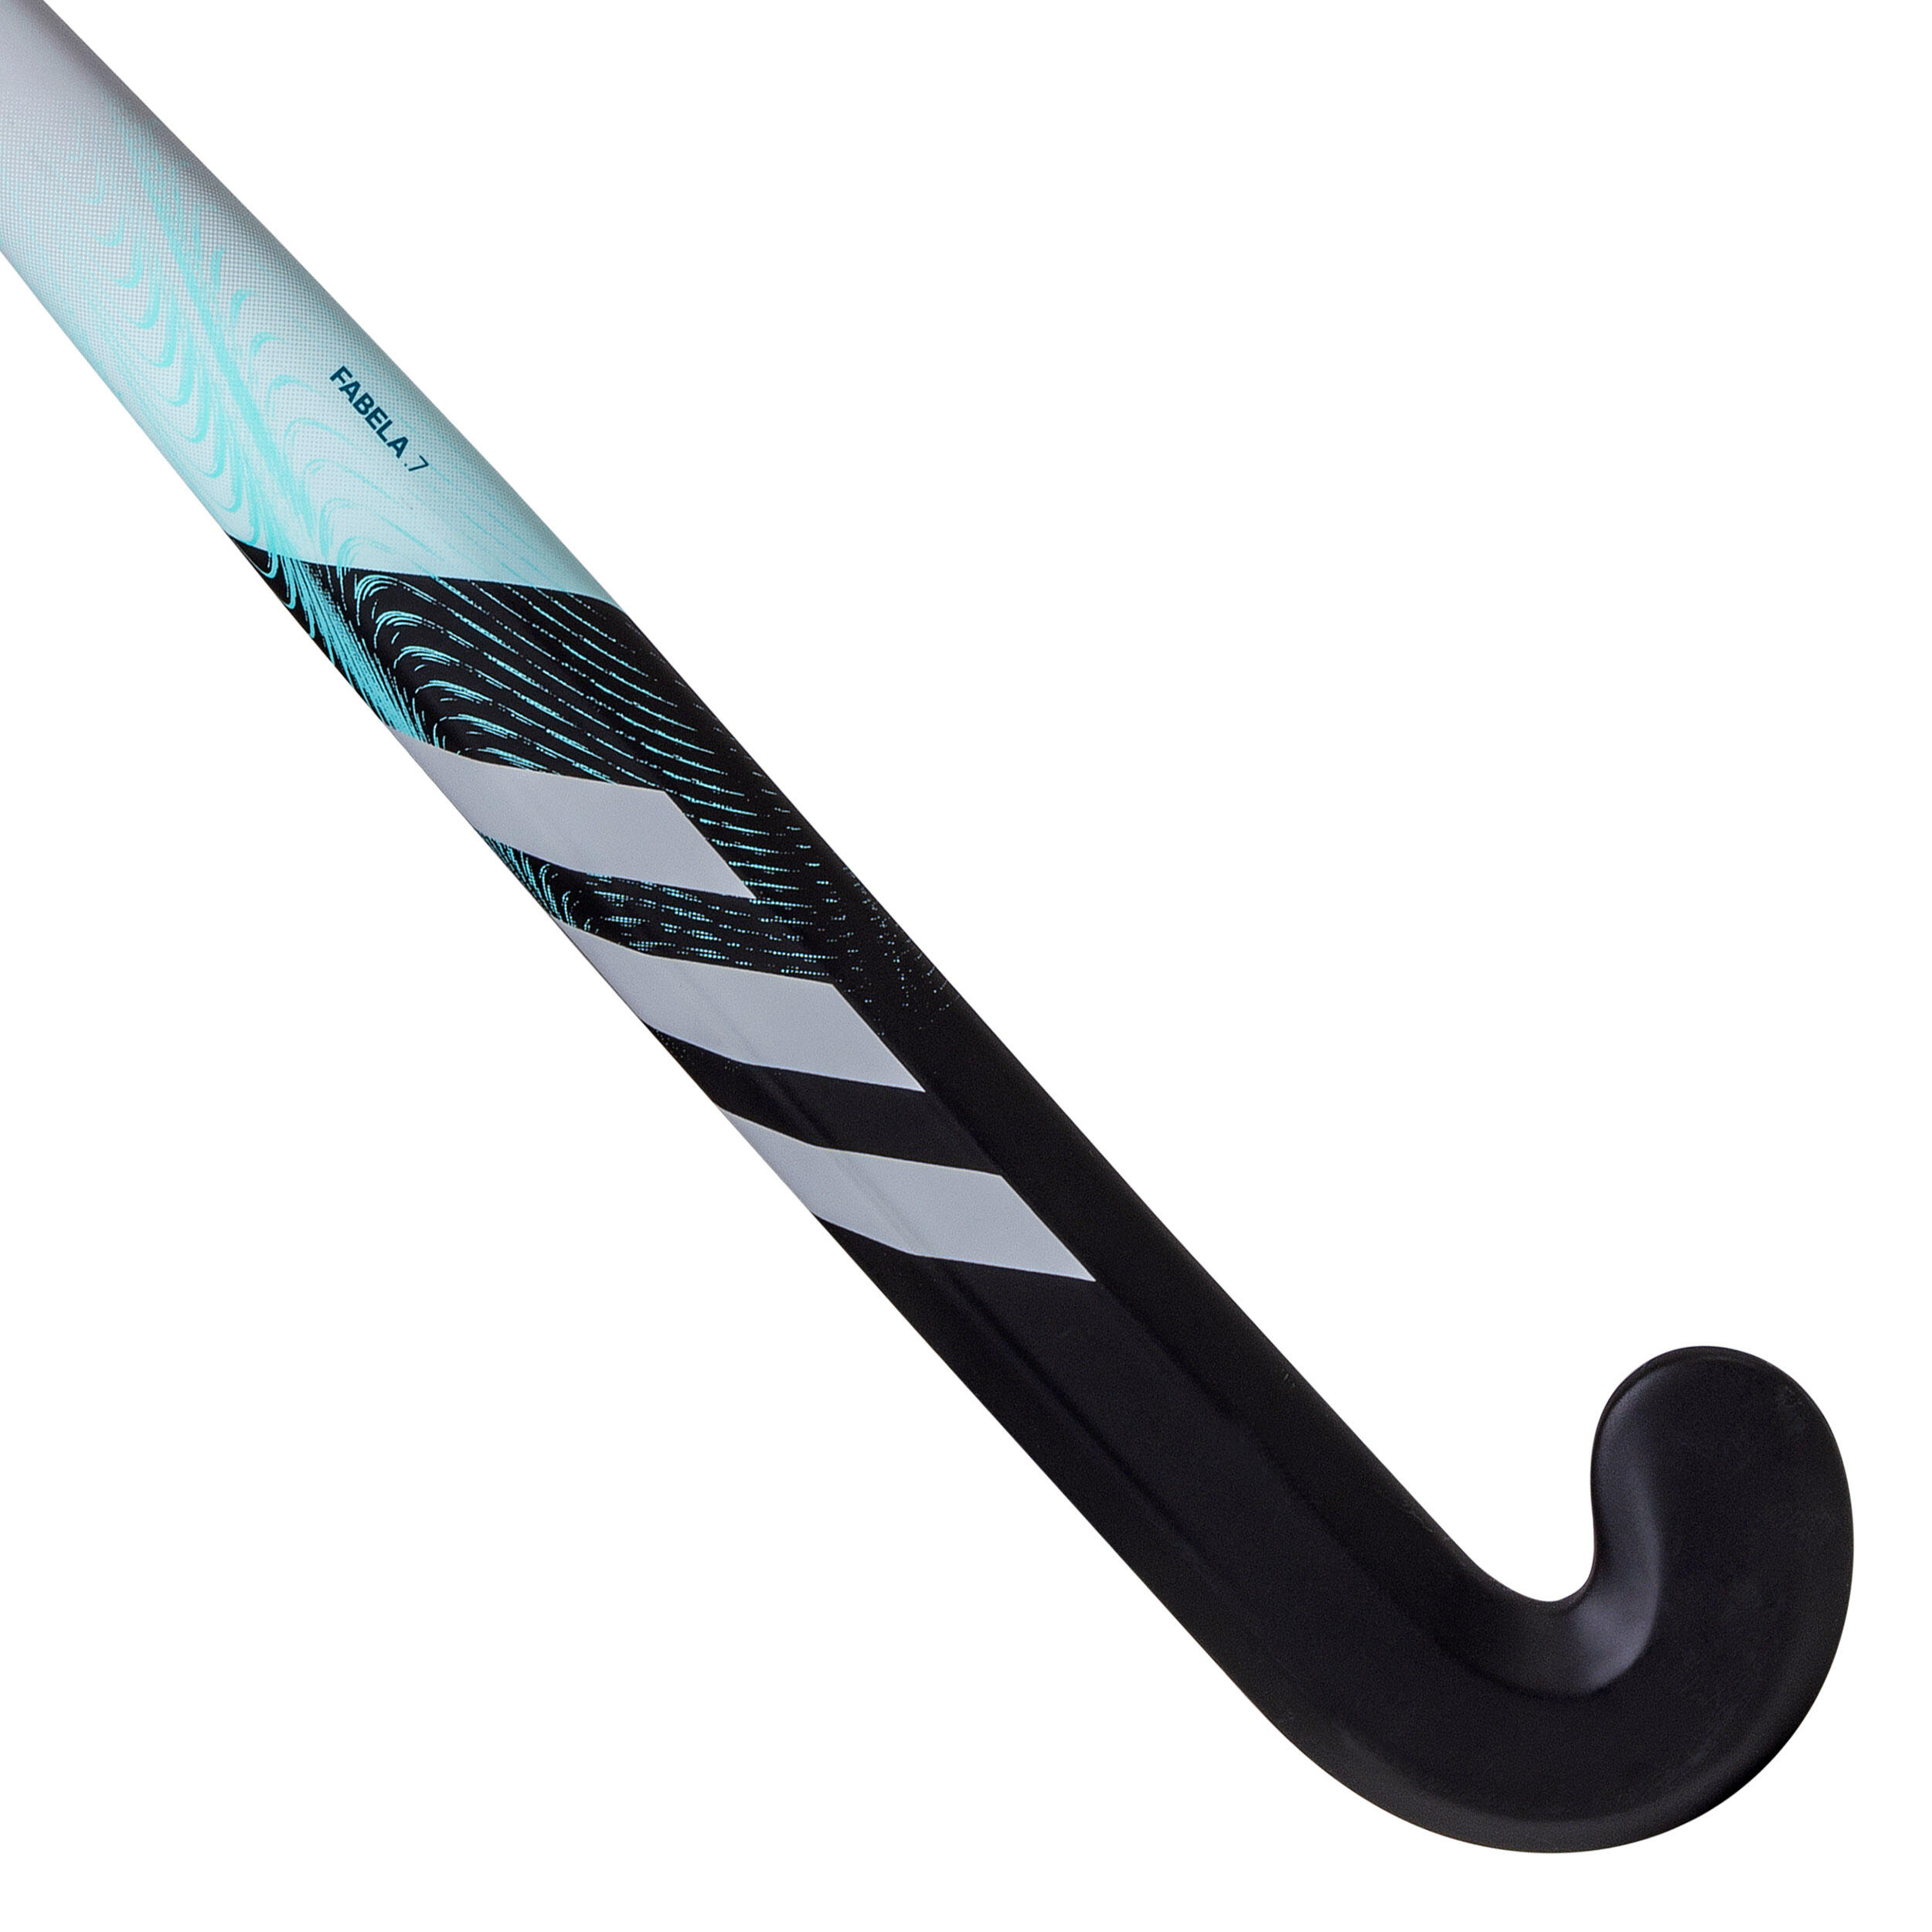 Adult Intermediate 20% Carbon Mid Bow Field Hockey Stick Fabela .7 - Black/Turquoise 1/12